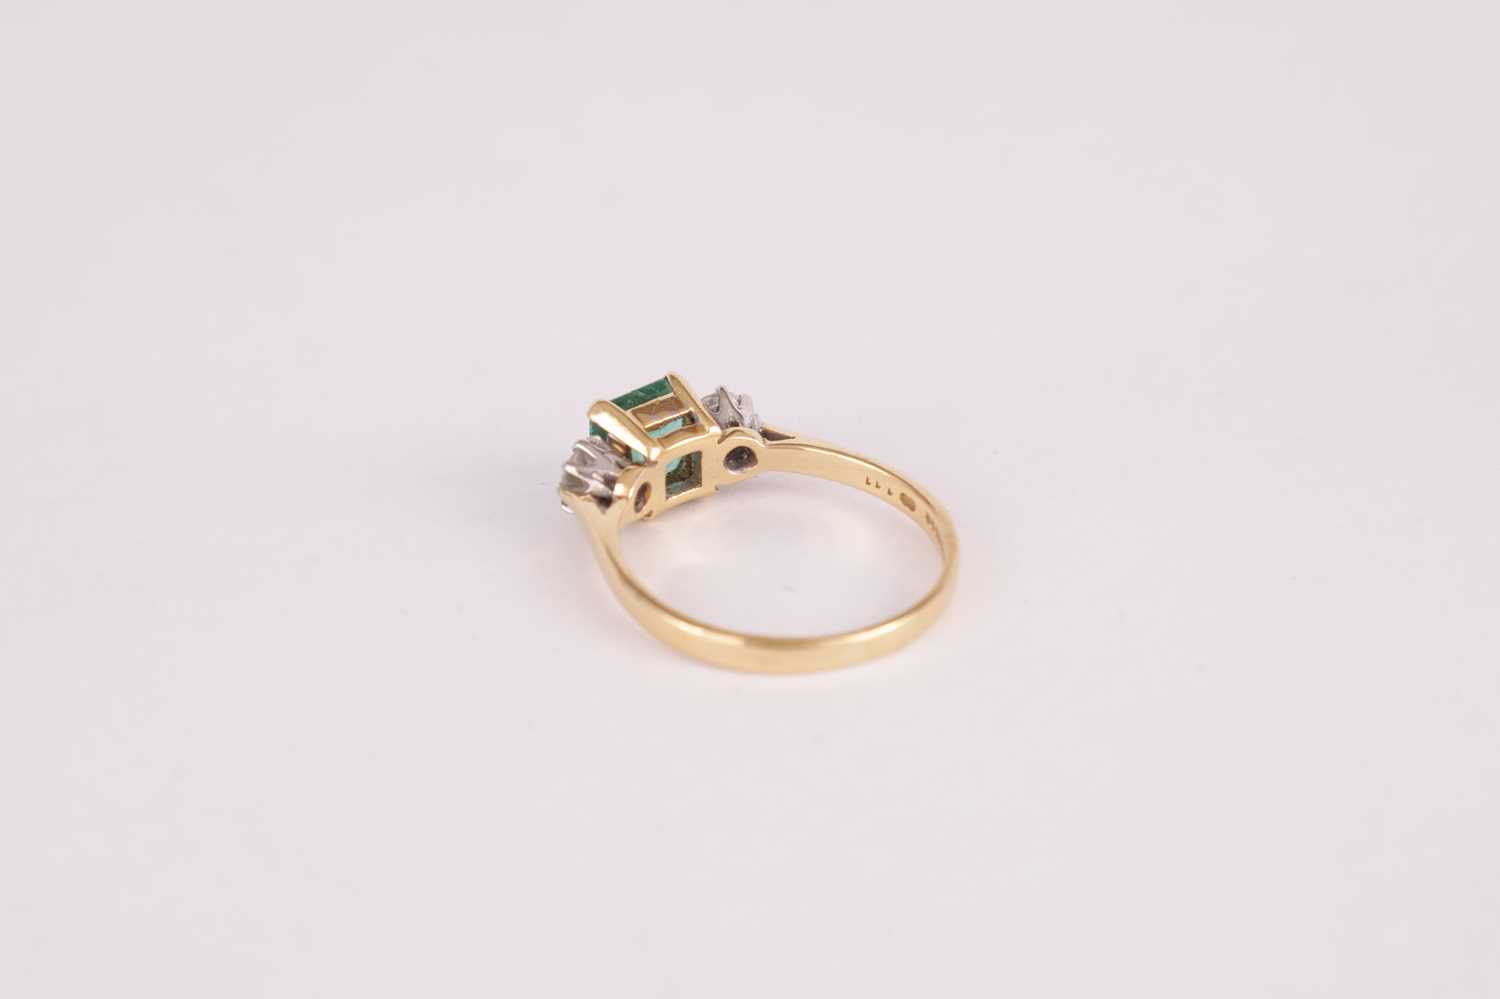 A LADIES 18CT GOLD THREE STONE EMERALD AND DIAMOND RING - Image 3 of 5